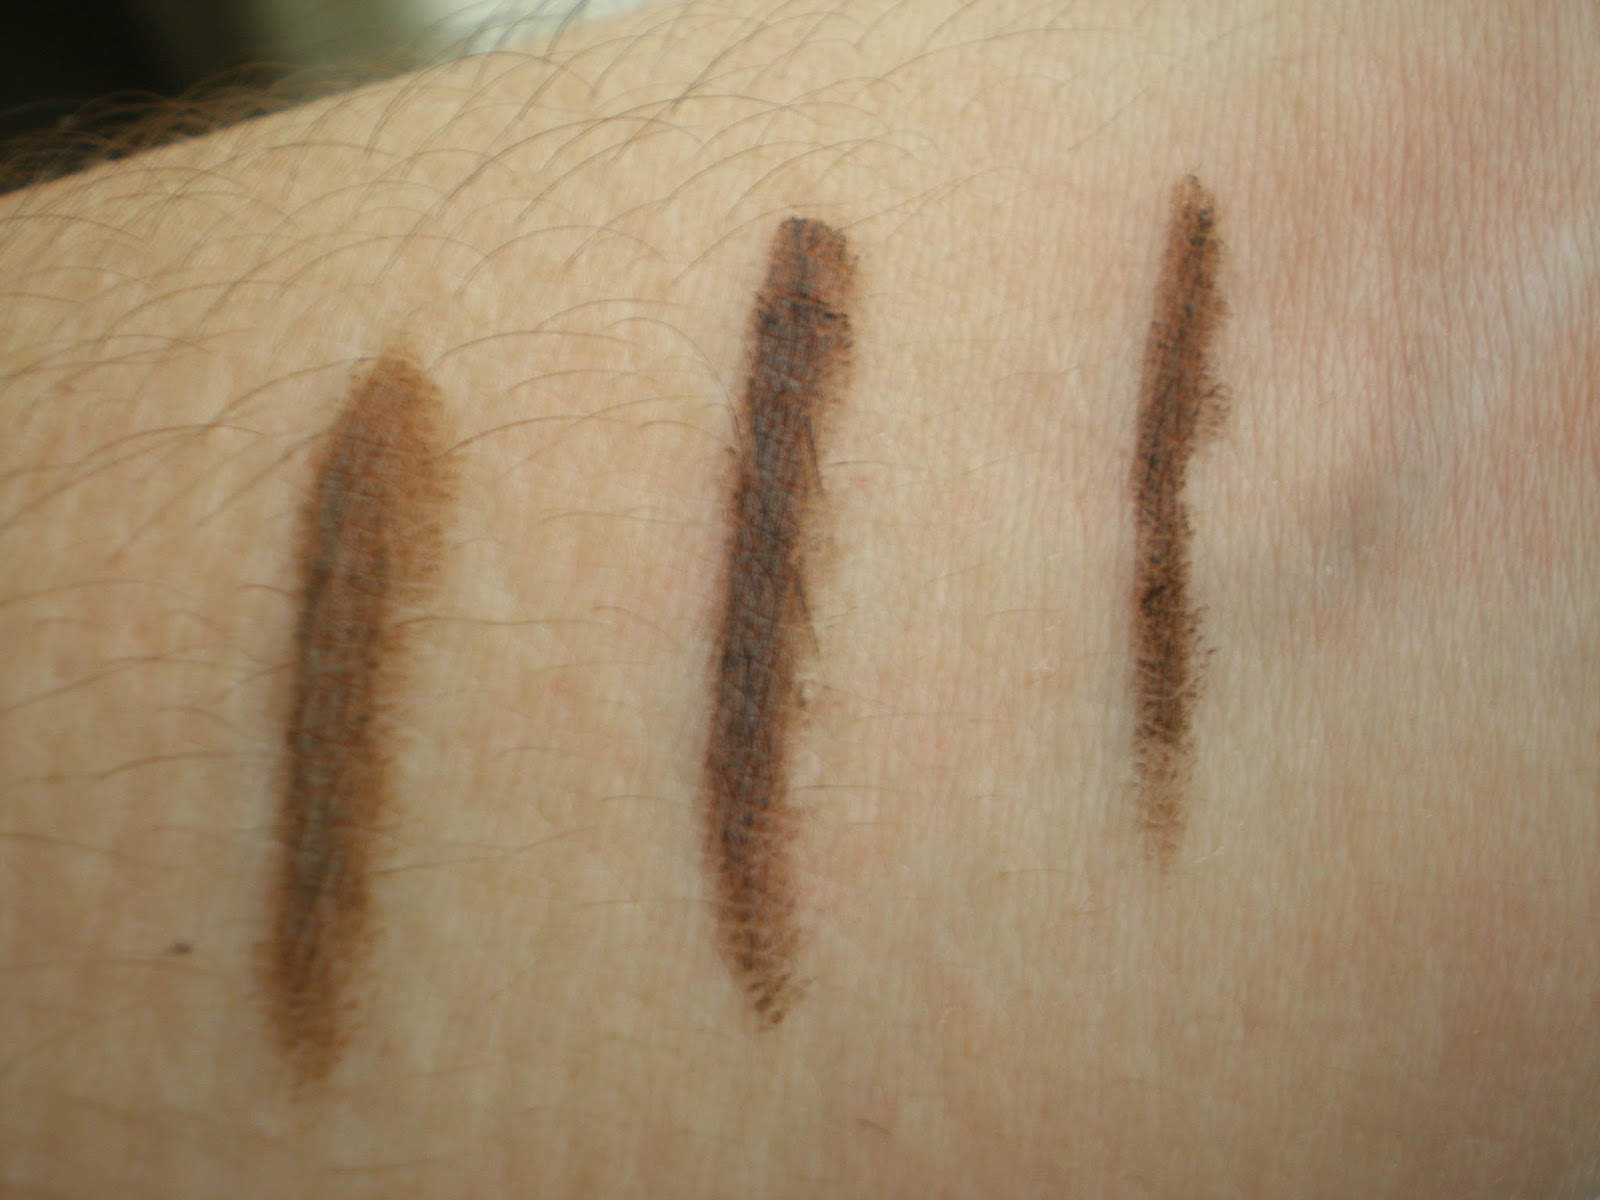 Swatches from left: Benefit instant brow pencil, ELF Eyebrow Lifter & Filler, L'oreal Super Liner Brow Artist